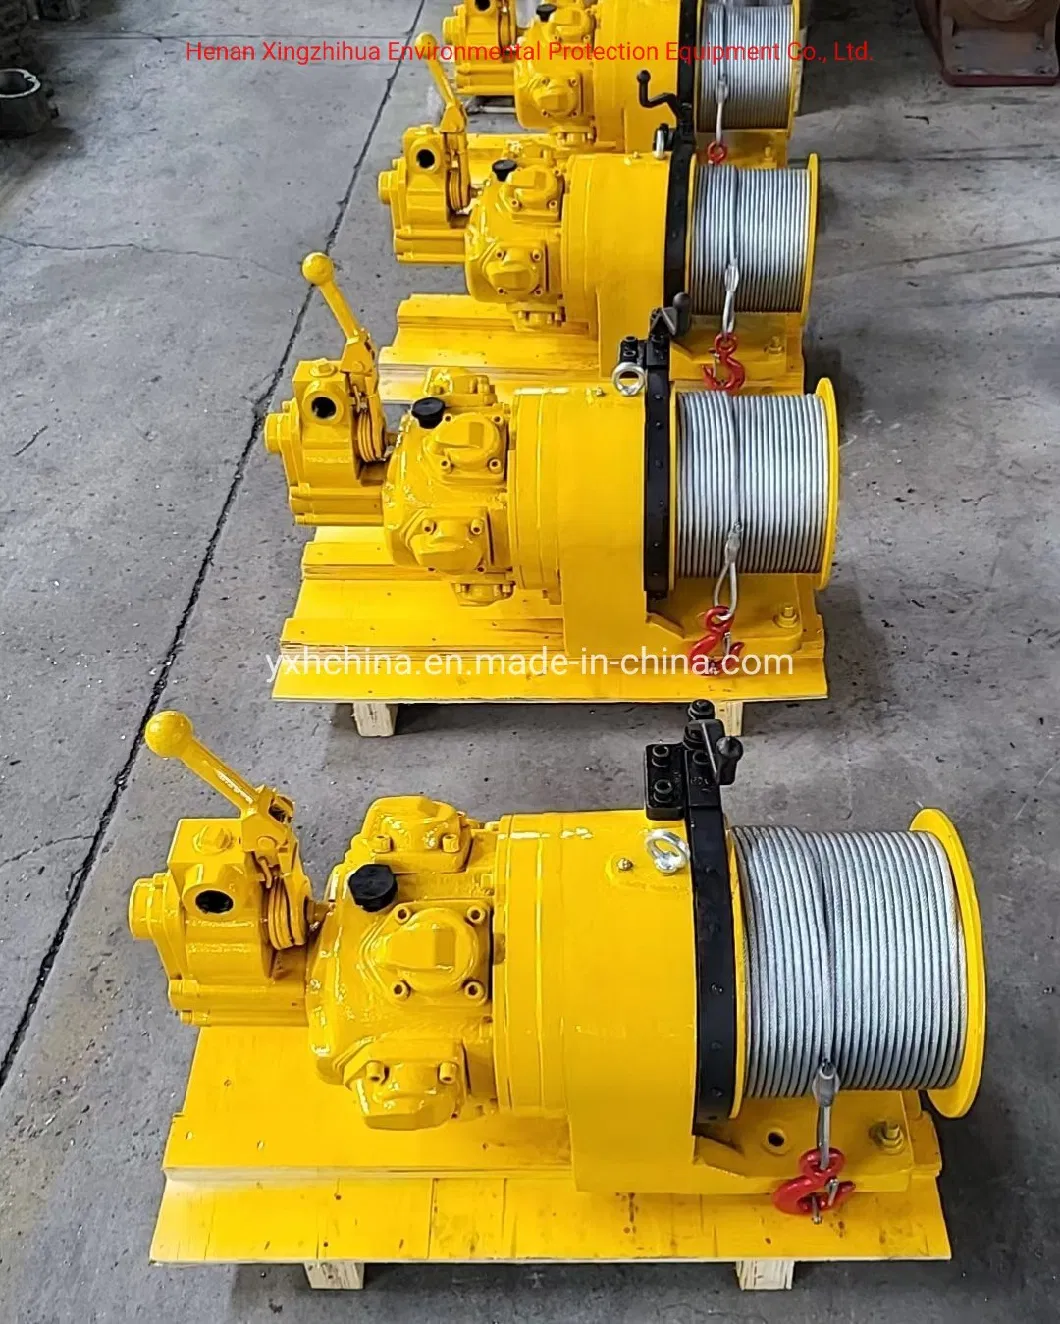 1 Ton 2ton High Quality Portable Hand Brake Air Pneumatic Winches Used for Mine or Construction